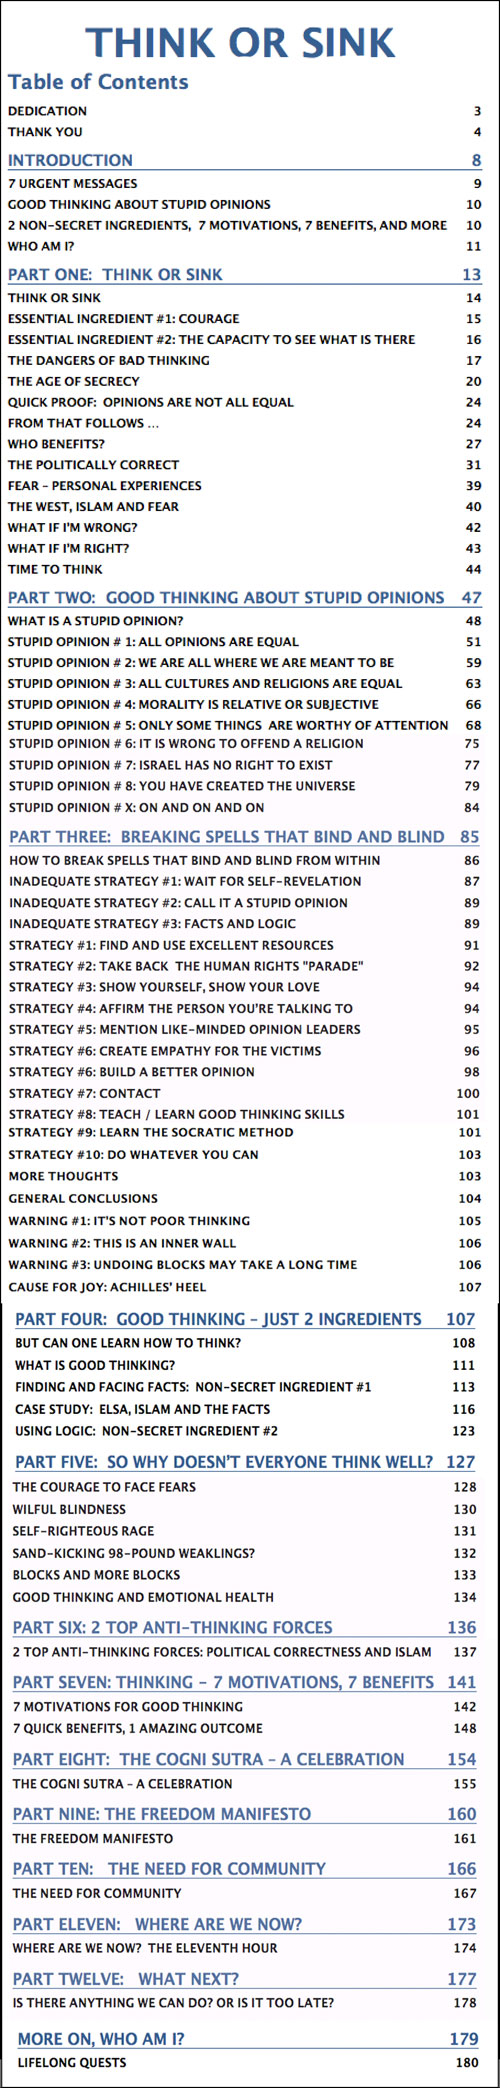 Think or Sink - table of contents